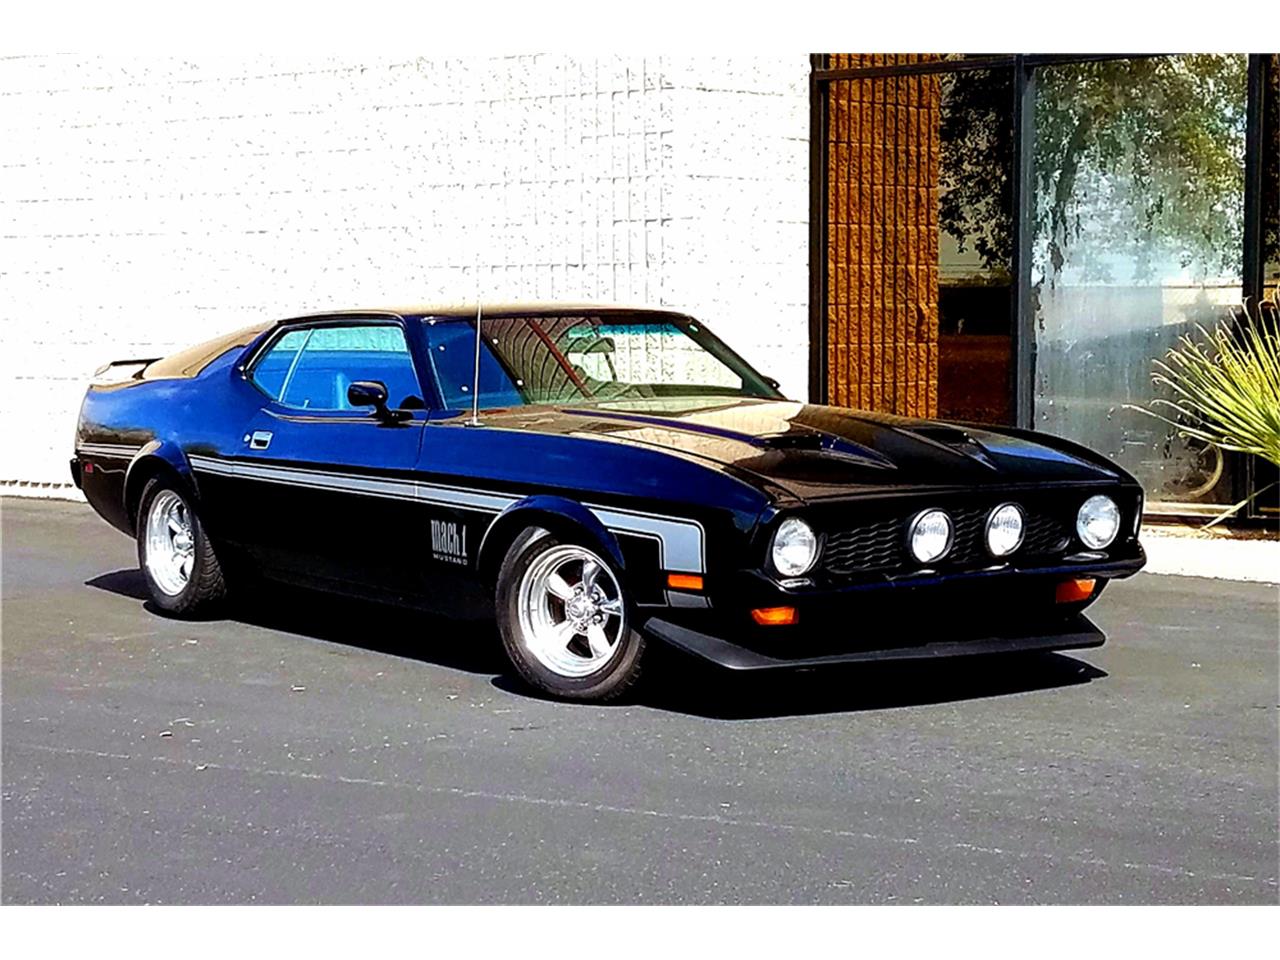 1972 Ford Mustang Mach 1 for Sale | ClassicCars.com | CC-1075325